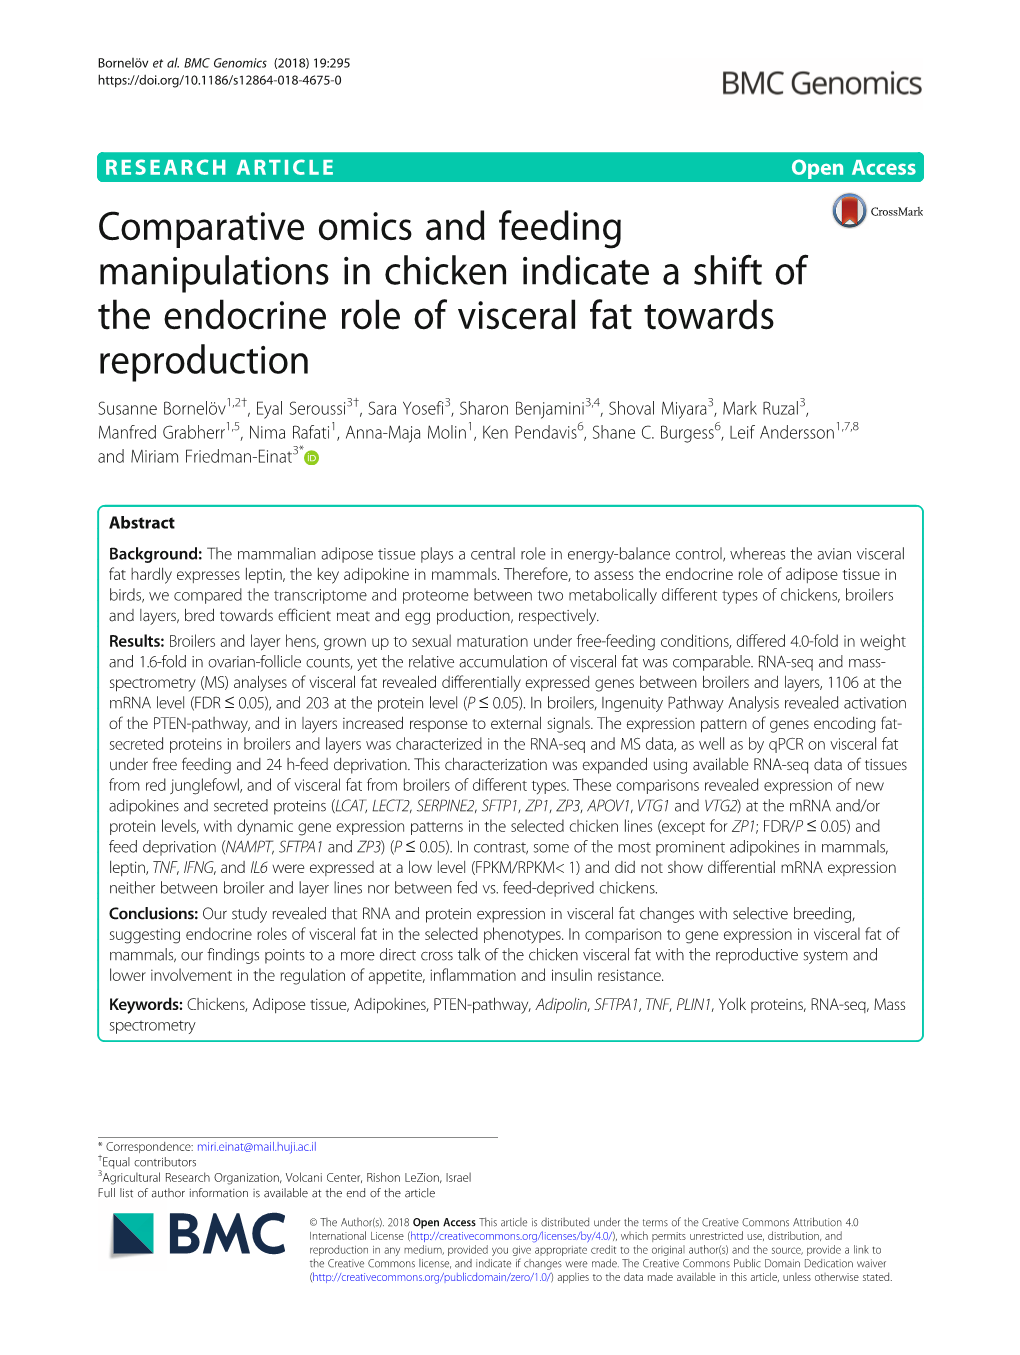 Comparative Omics and Feeding Manipulations in Chicken Indicate a Shift of the Endocrine Role of Visceral Fat Towards Reproducti